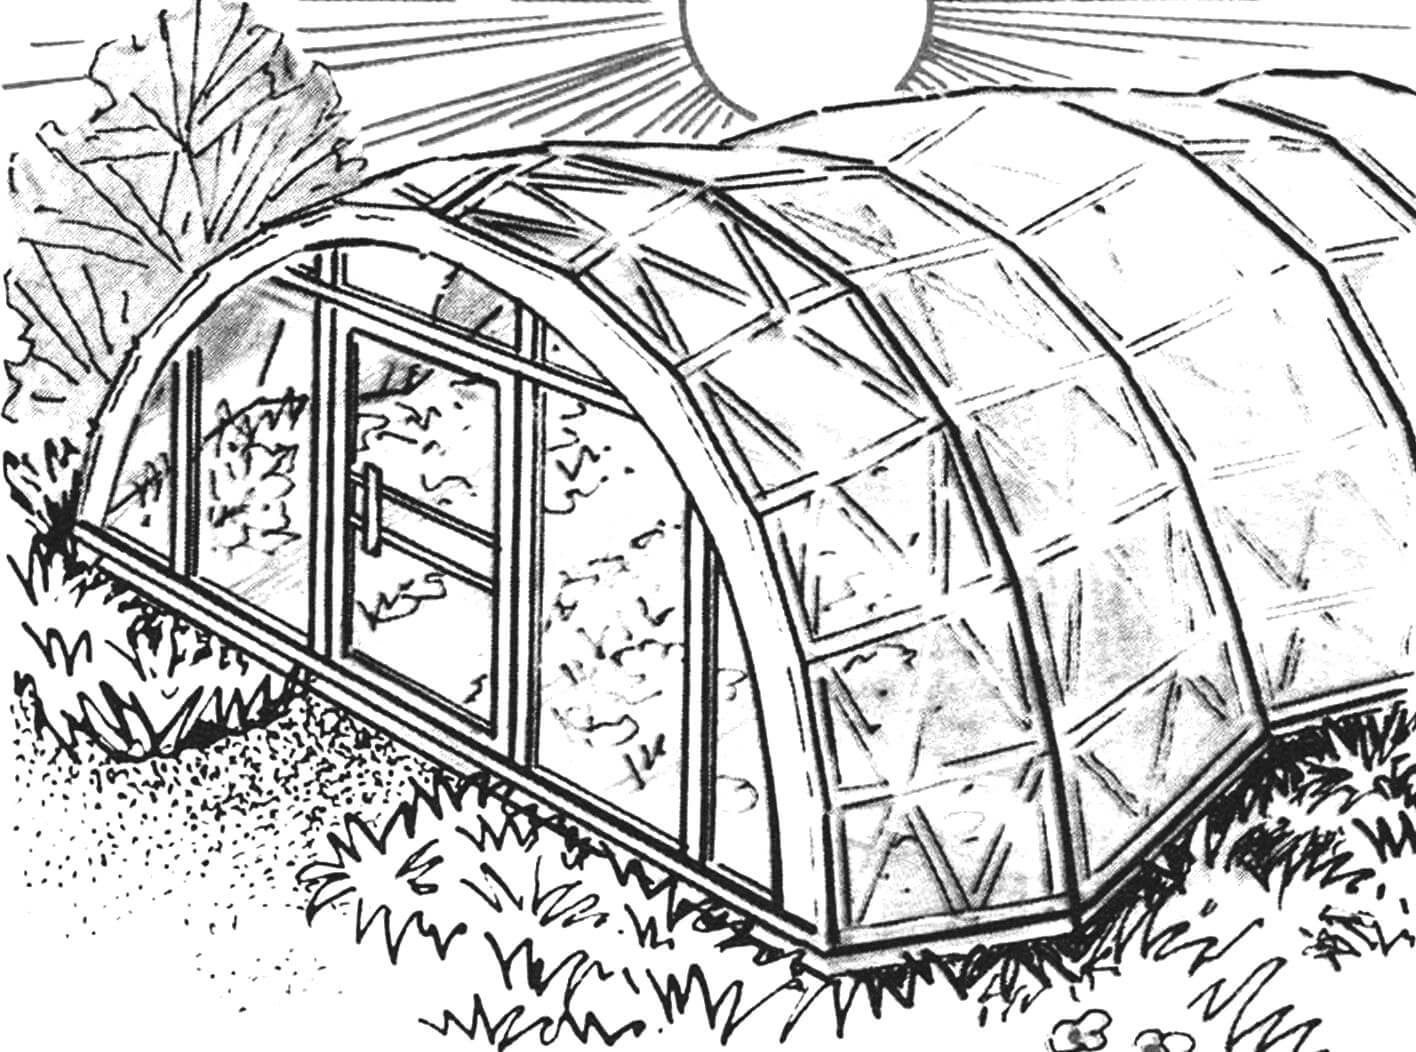 Characteristics of the arched greenhouse